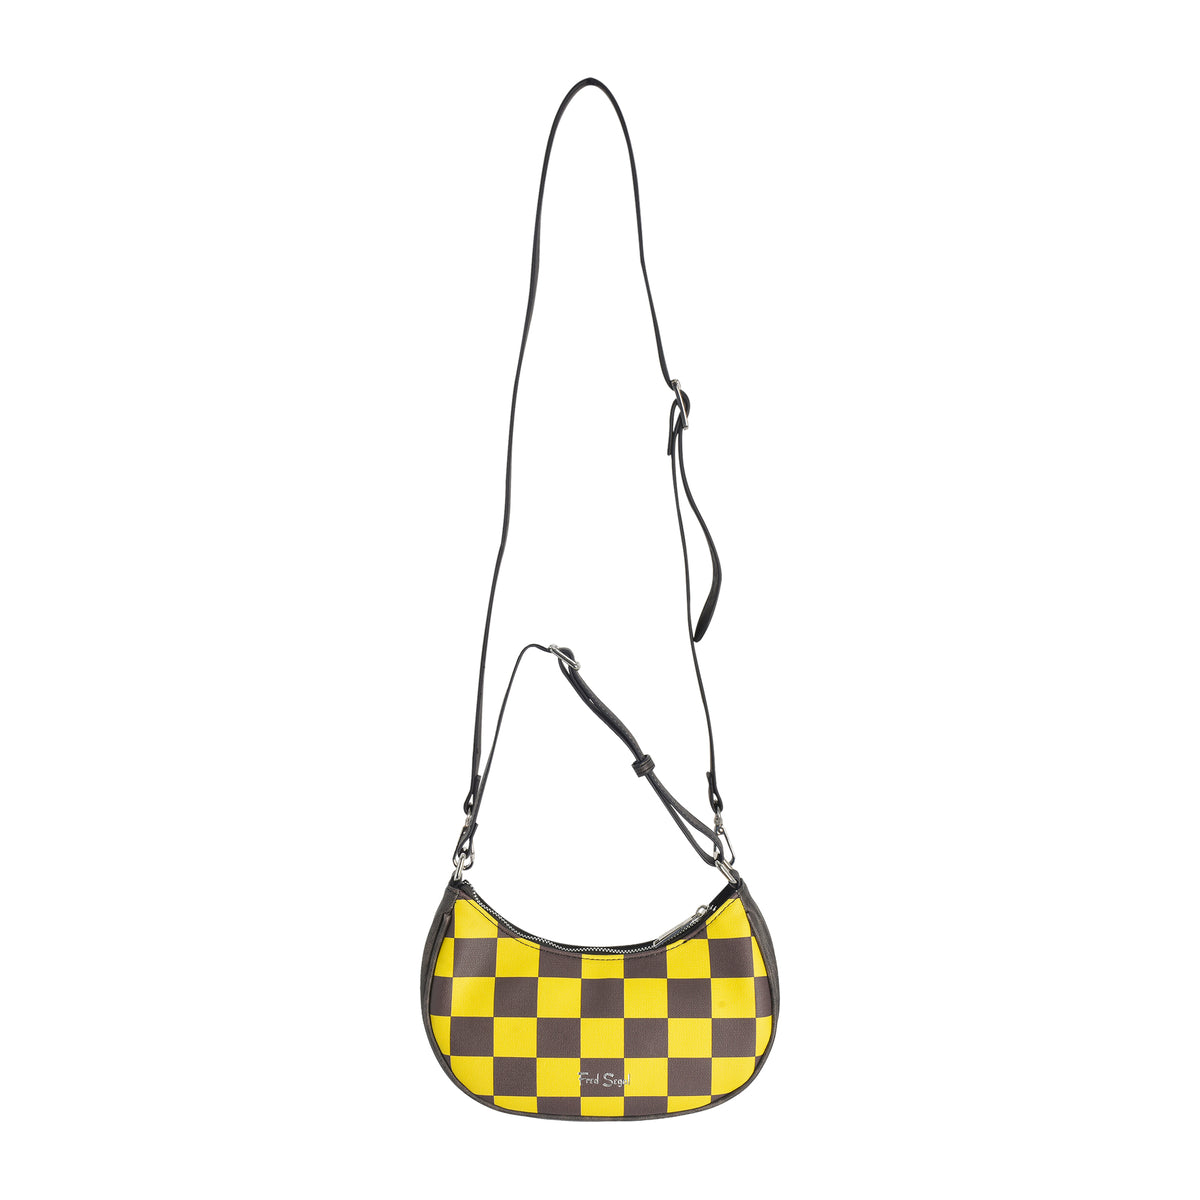 Fred Segal - Harry Potter Quidditch House Hufflepuff Crossbody